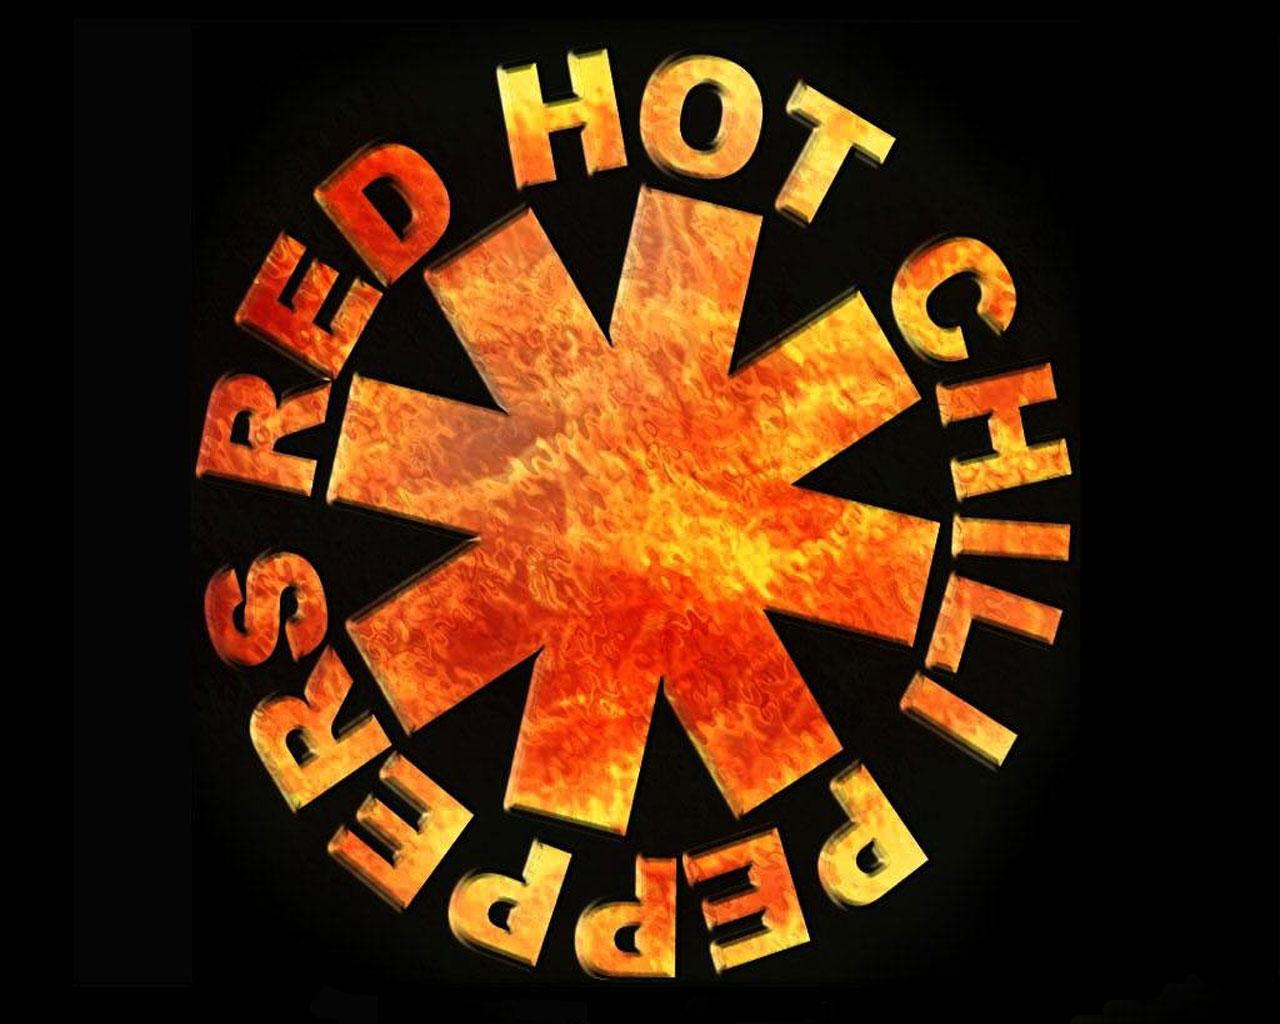 Red Hot Chilli Peppers Wallpaper #2 1280 x 1024 